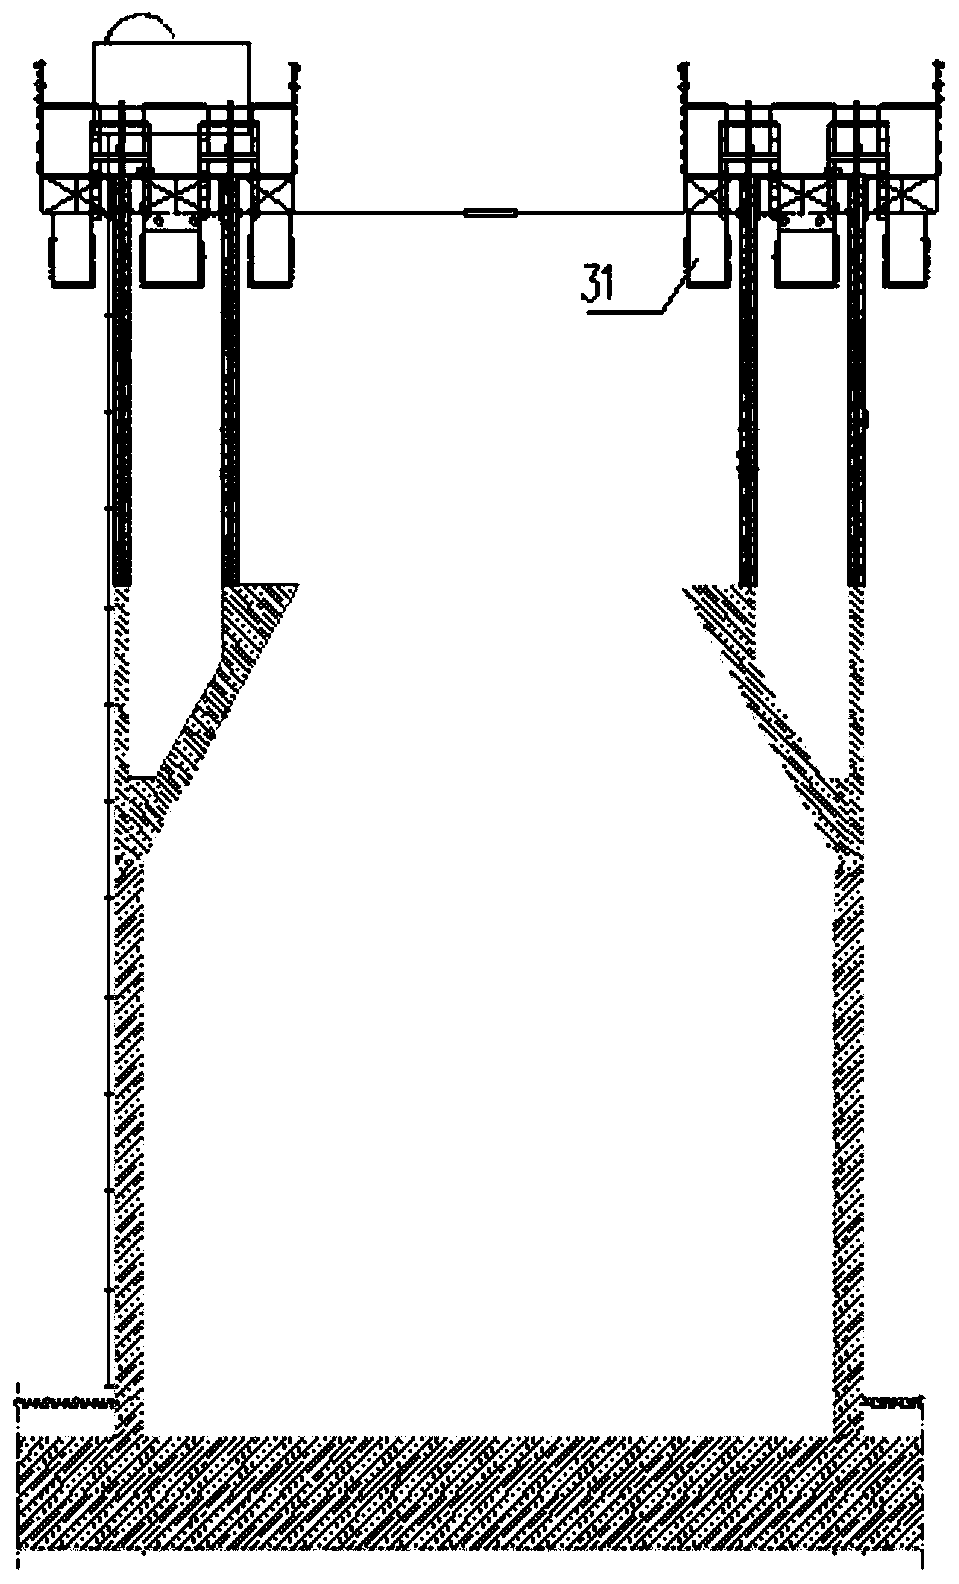 Double-cylinder-wall concrete silo slip form construction operation platform and construction method